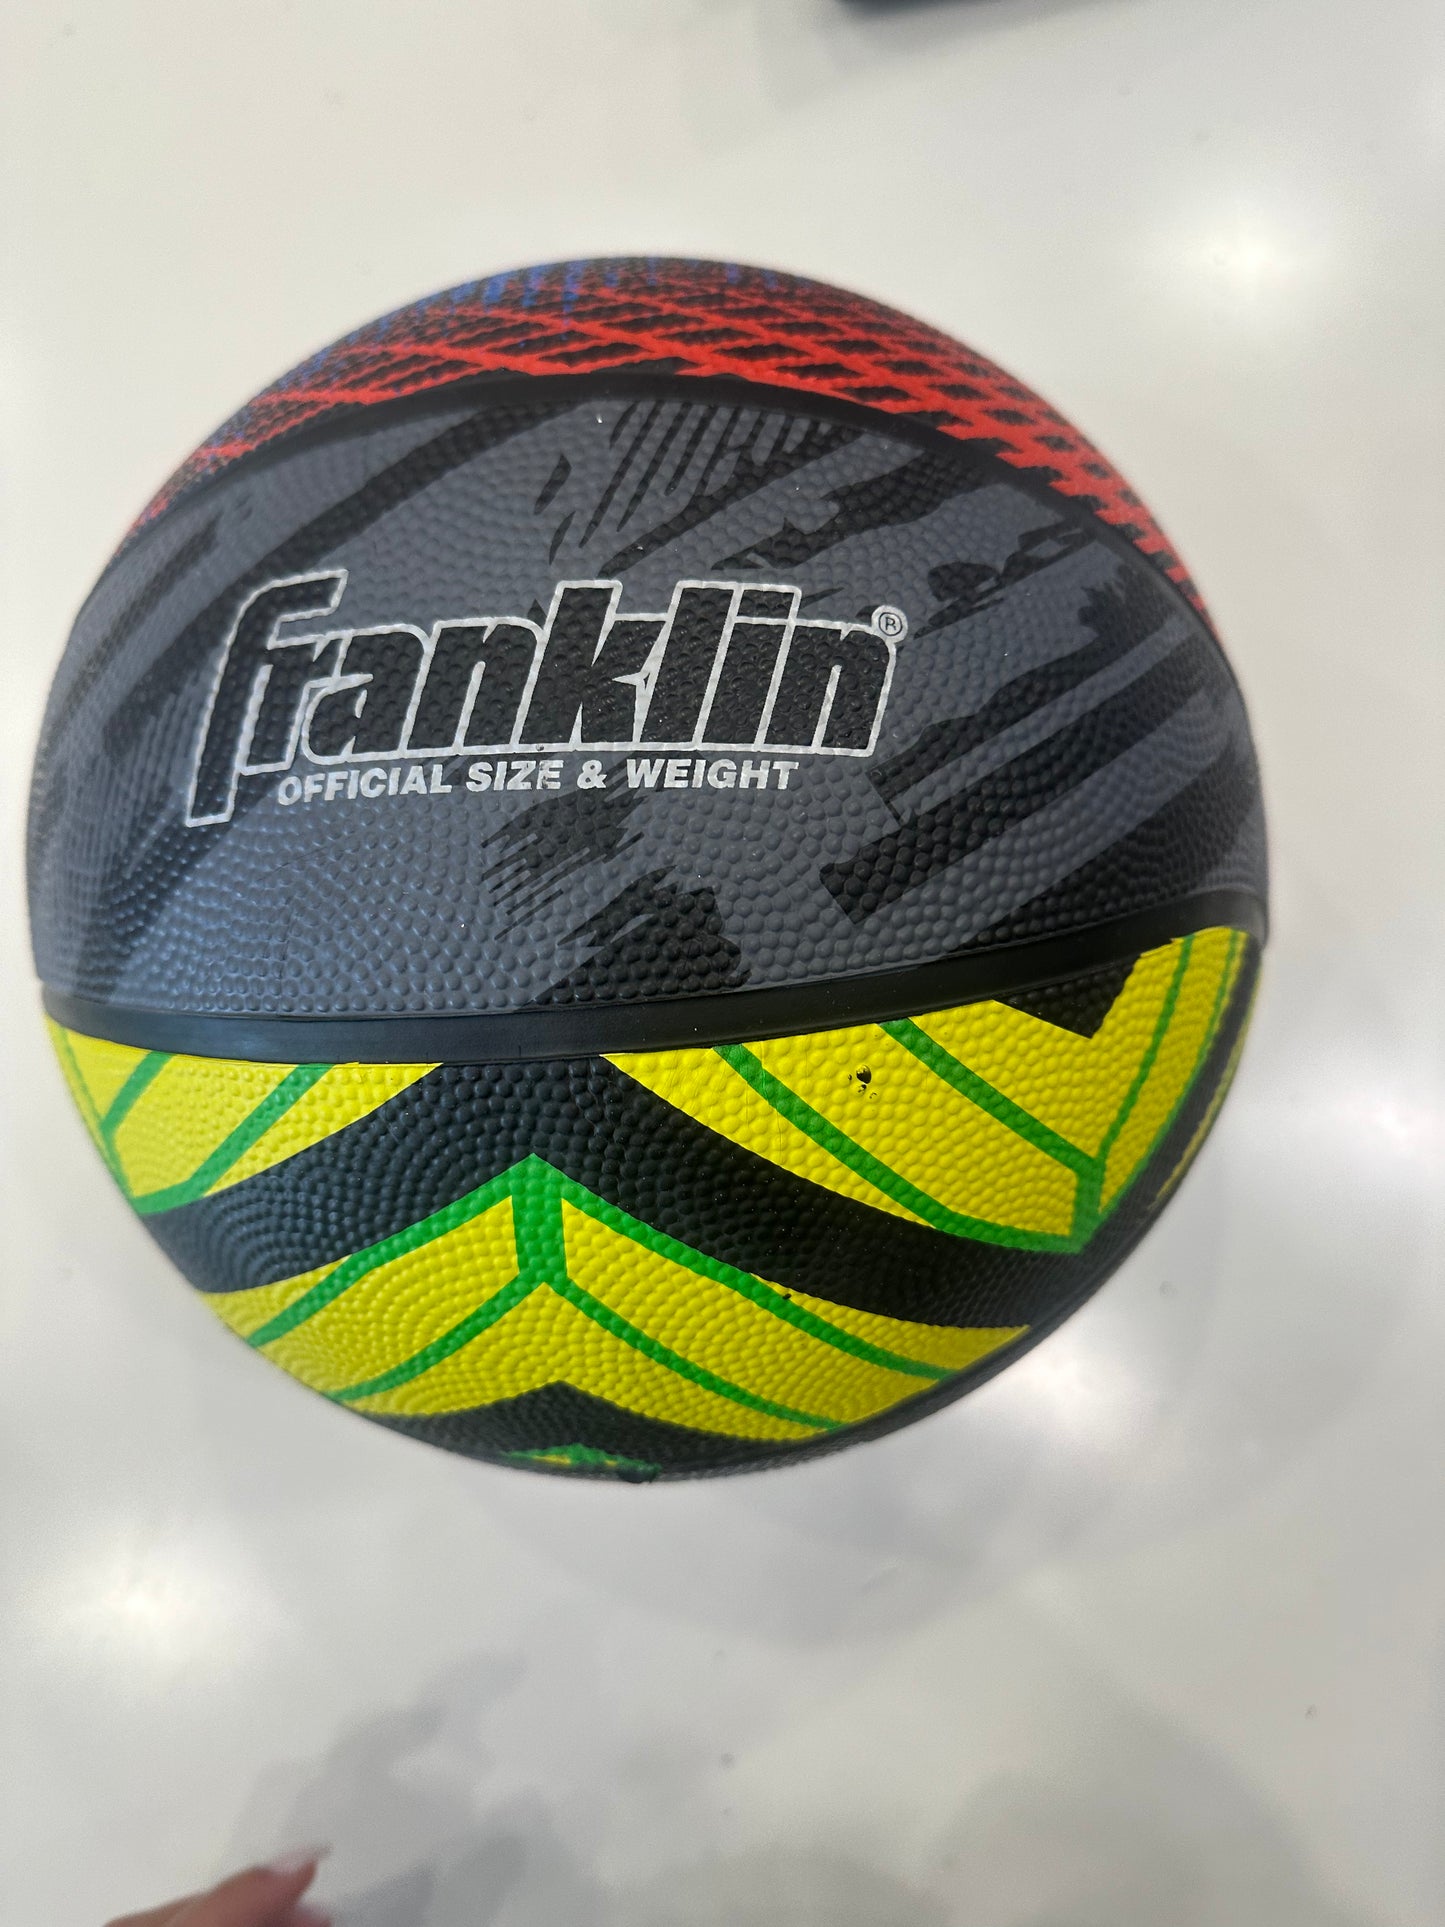 Franklin sports colored basketball